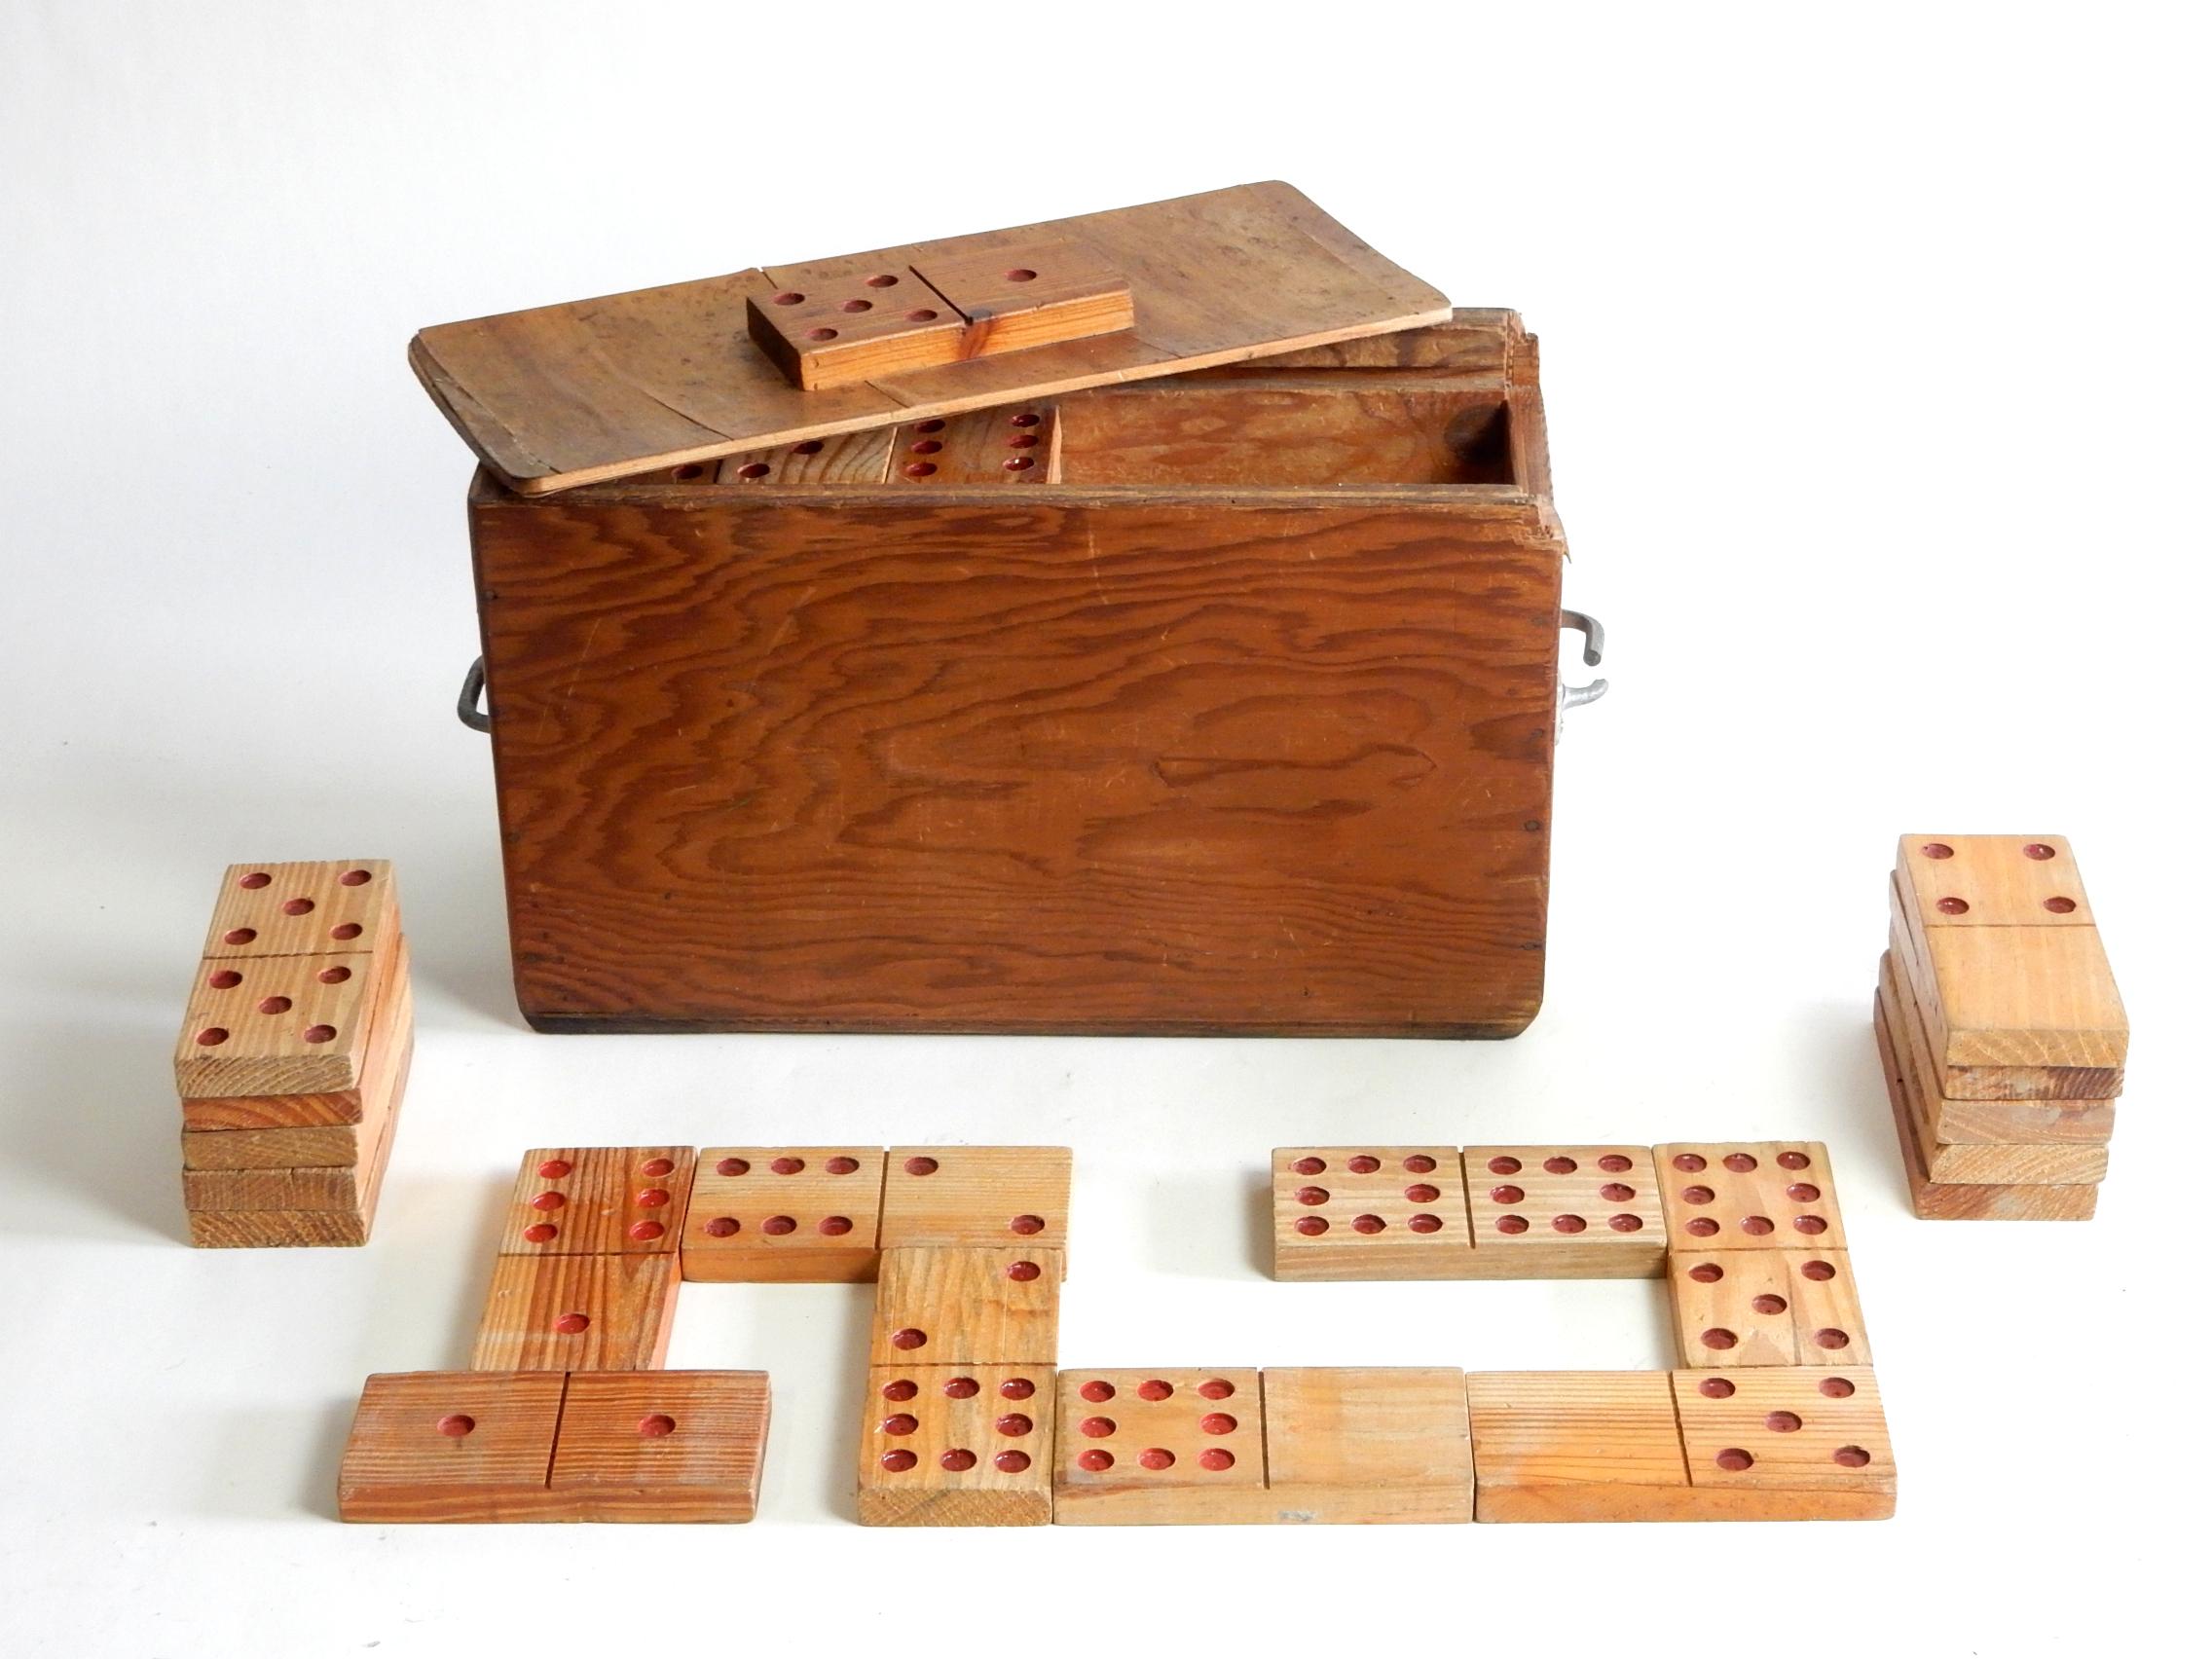 A set of 55+1 extra large plywood Dominos tiles
